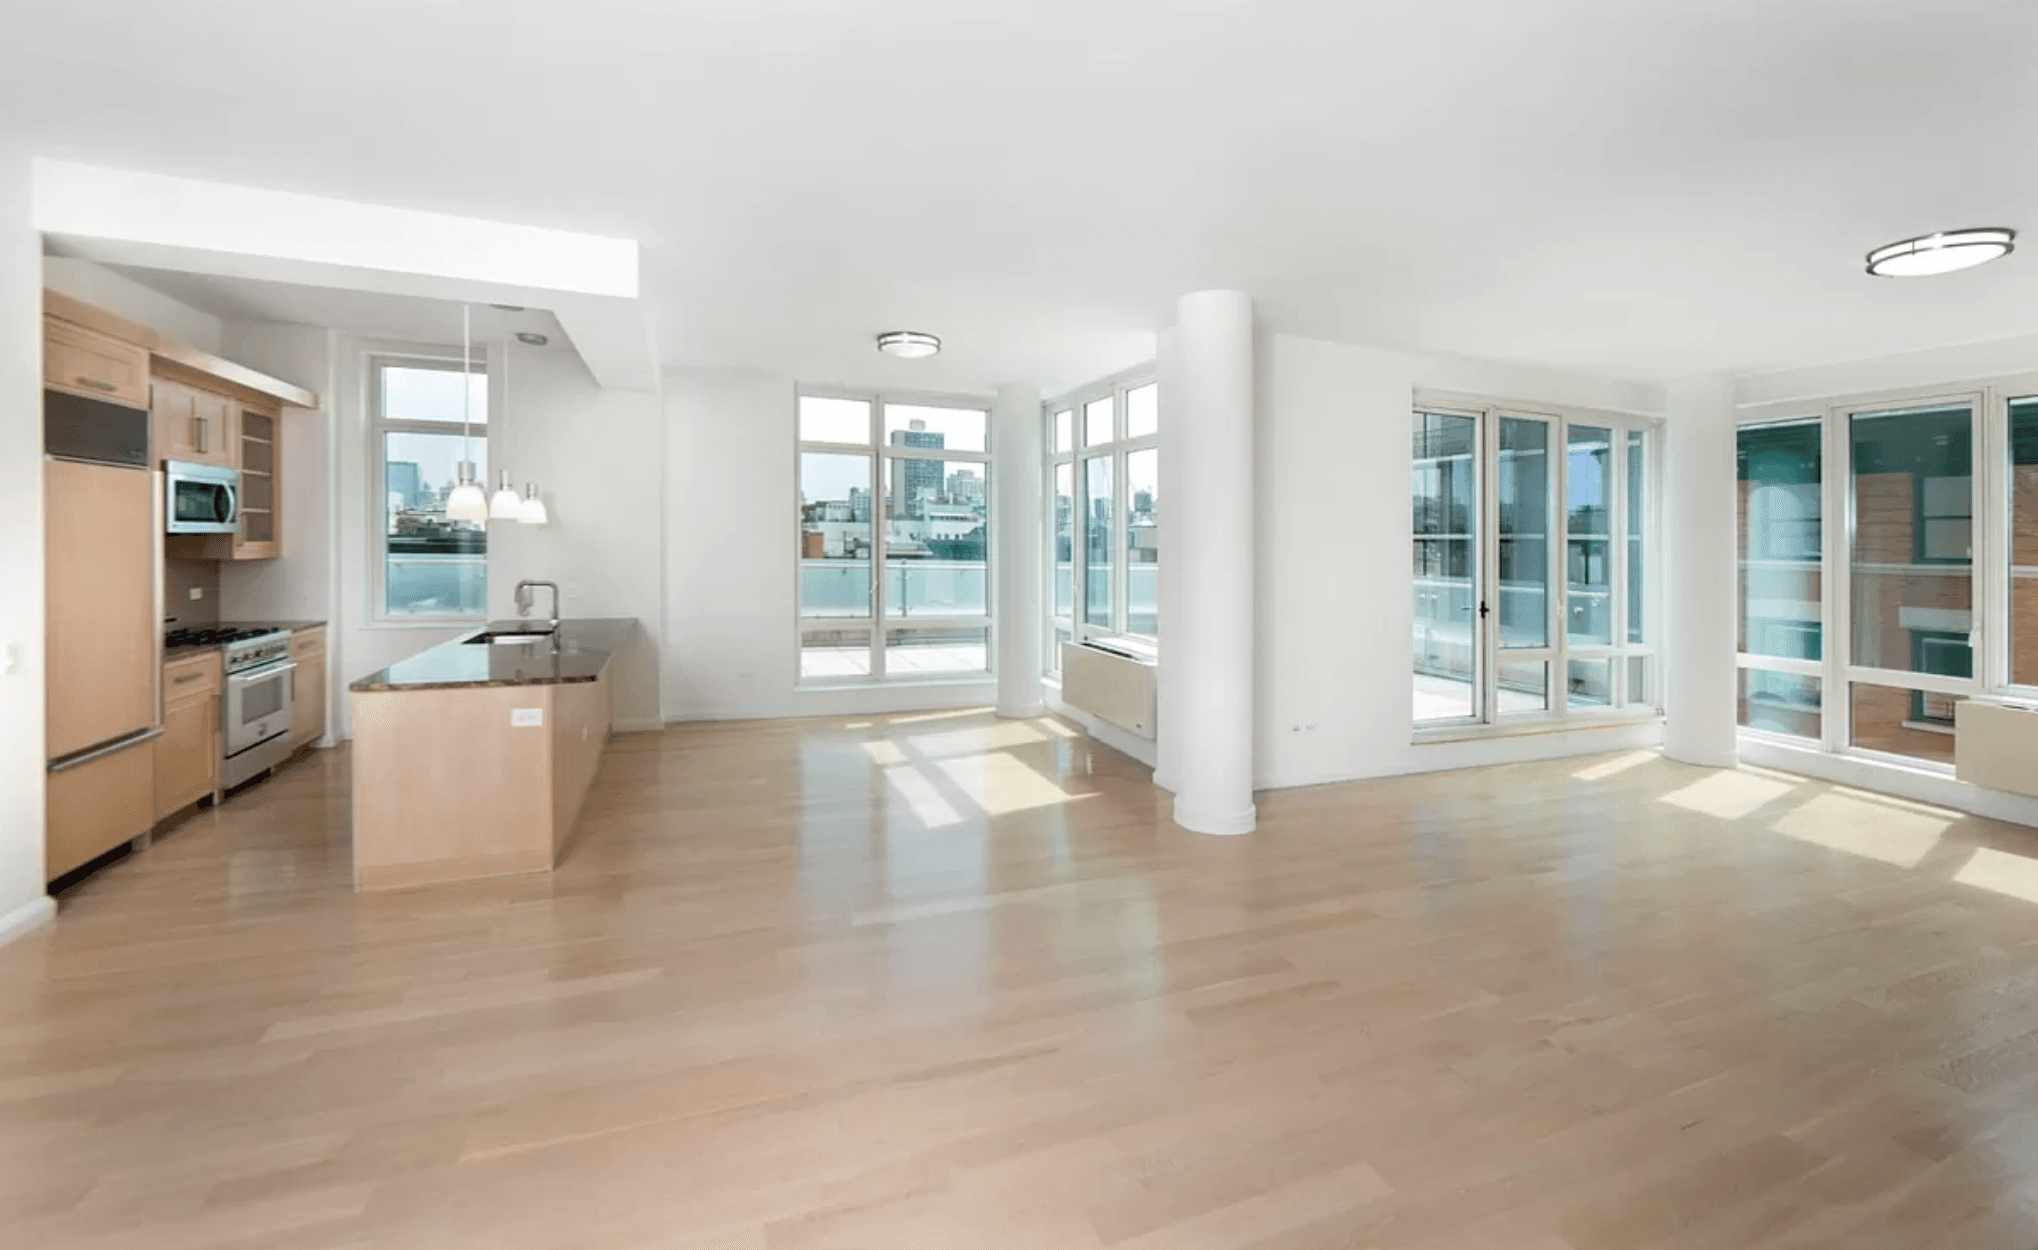 SoHo Luxury Living | 3 Bed 2.5 Bath |Roof Deck and Gym | Natural Light |$20,000